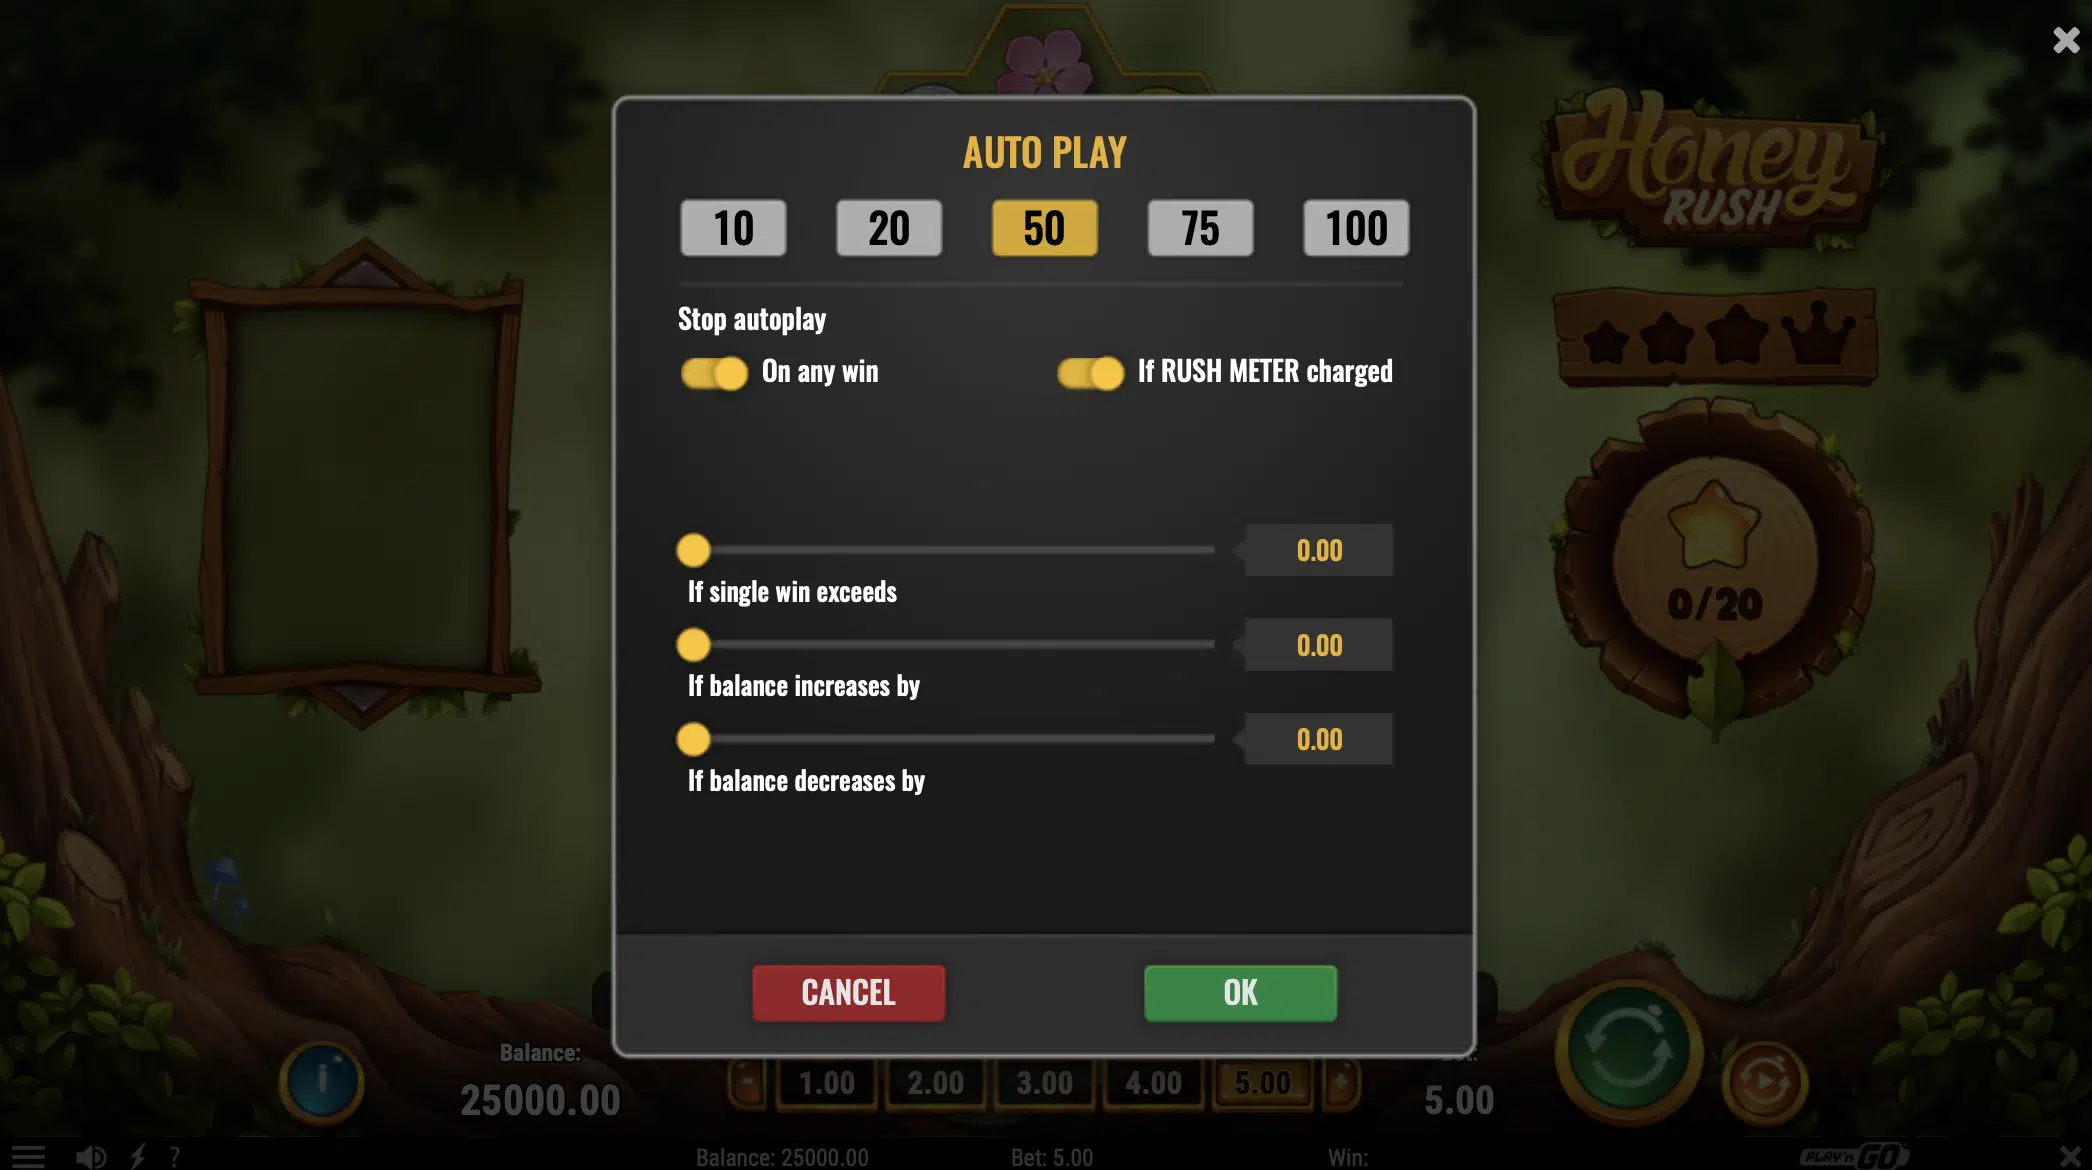 Auto Play Allows Players to Set Win and Loss Limits